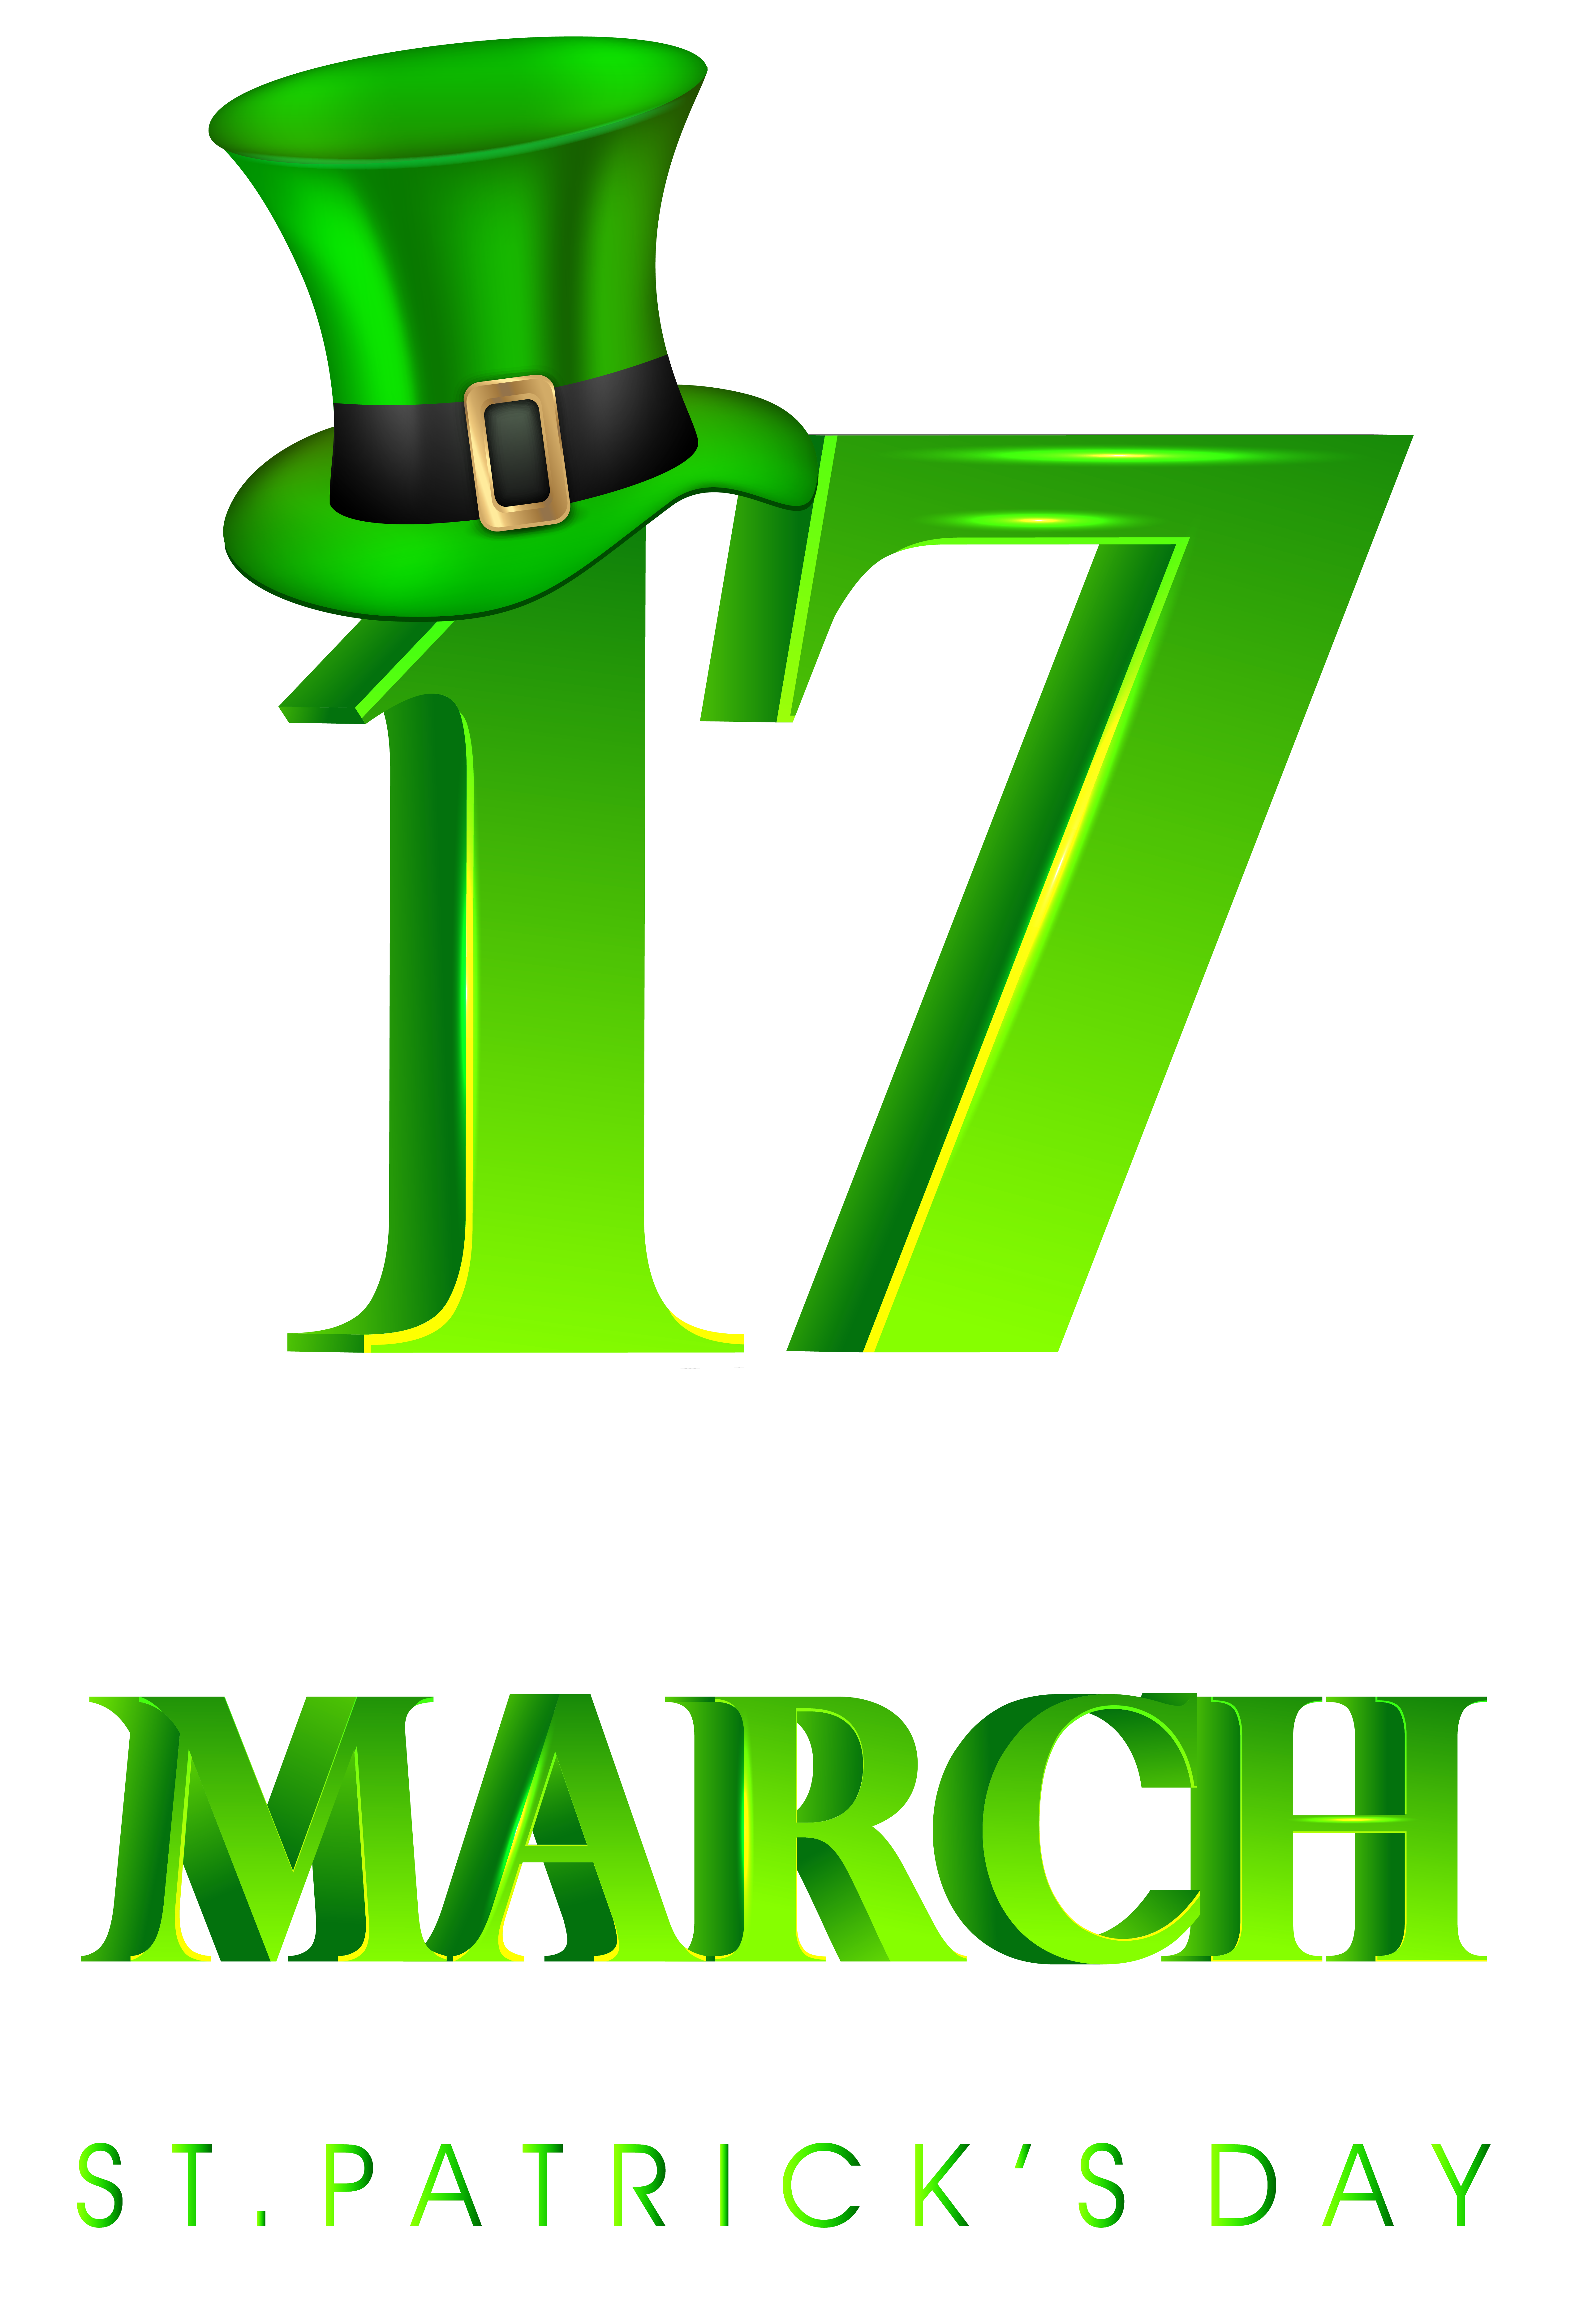 March St Patrick's Day 2020 Wallpapers Wallpaper Cave